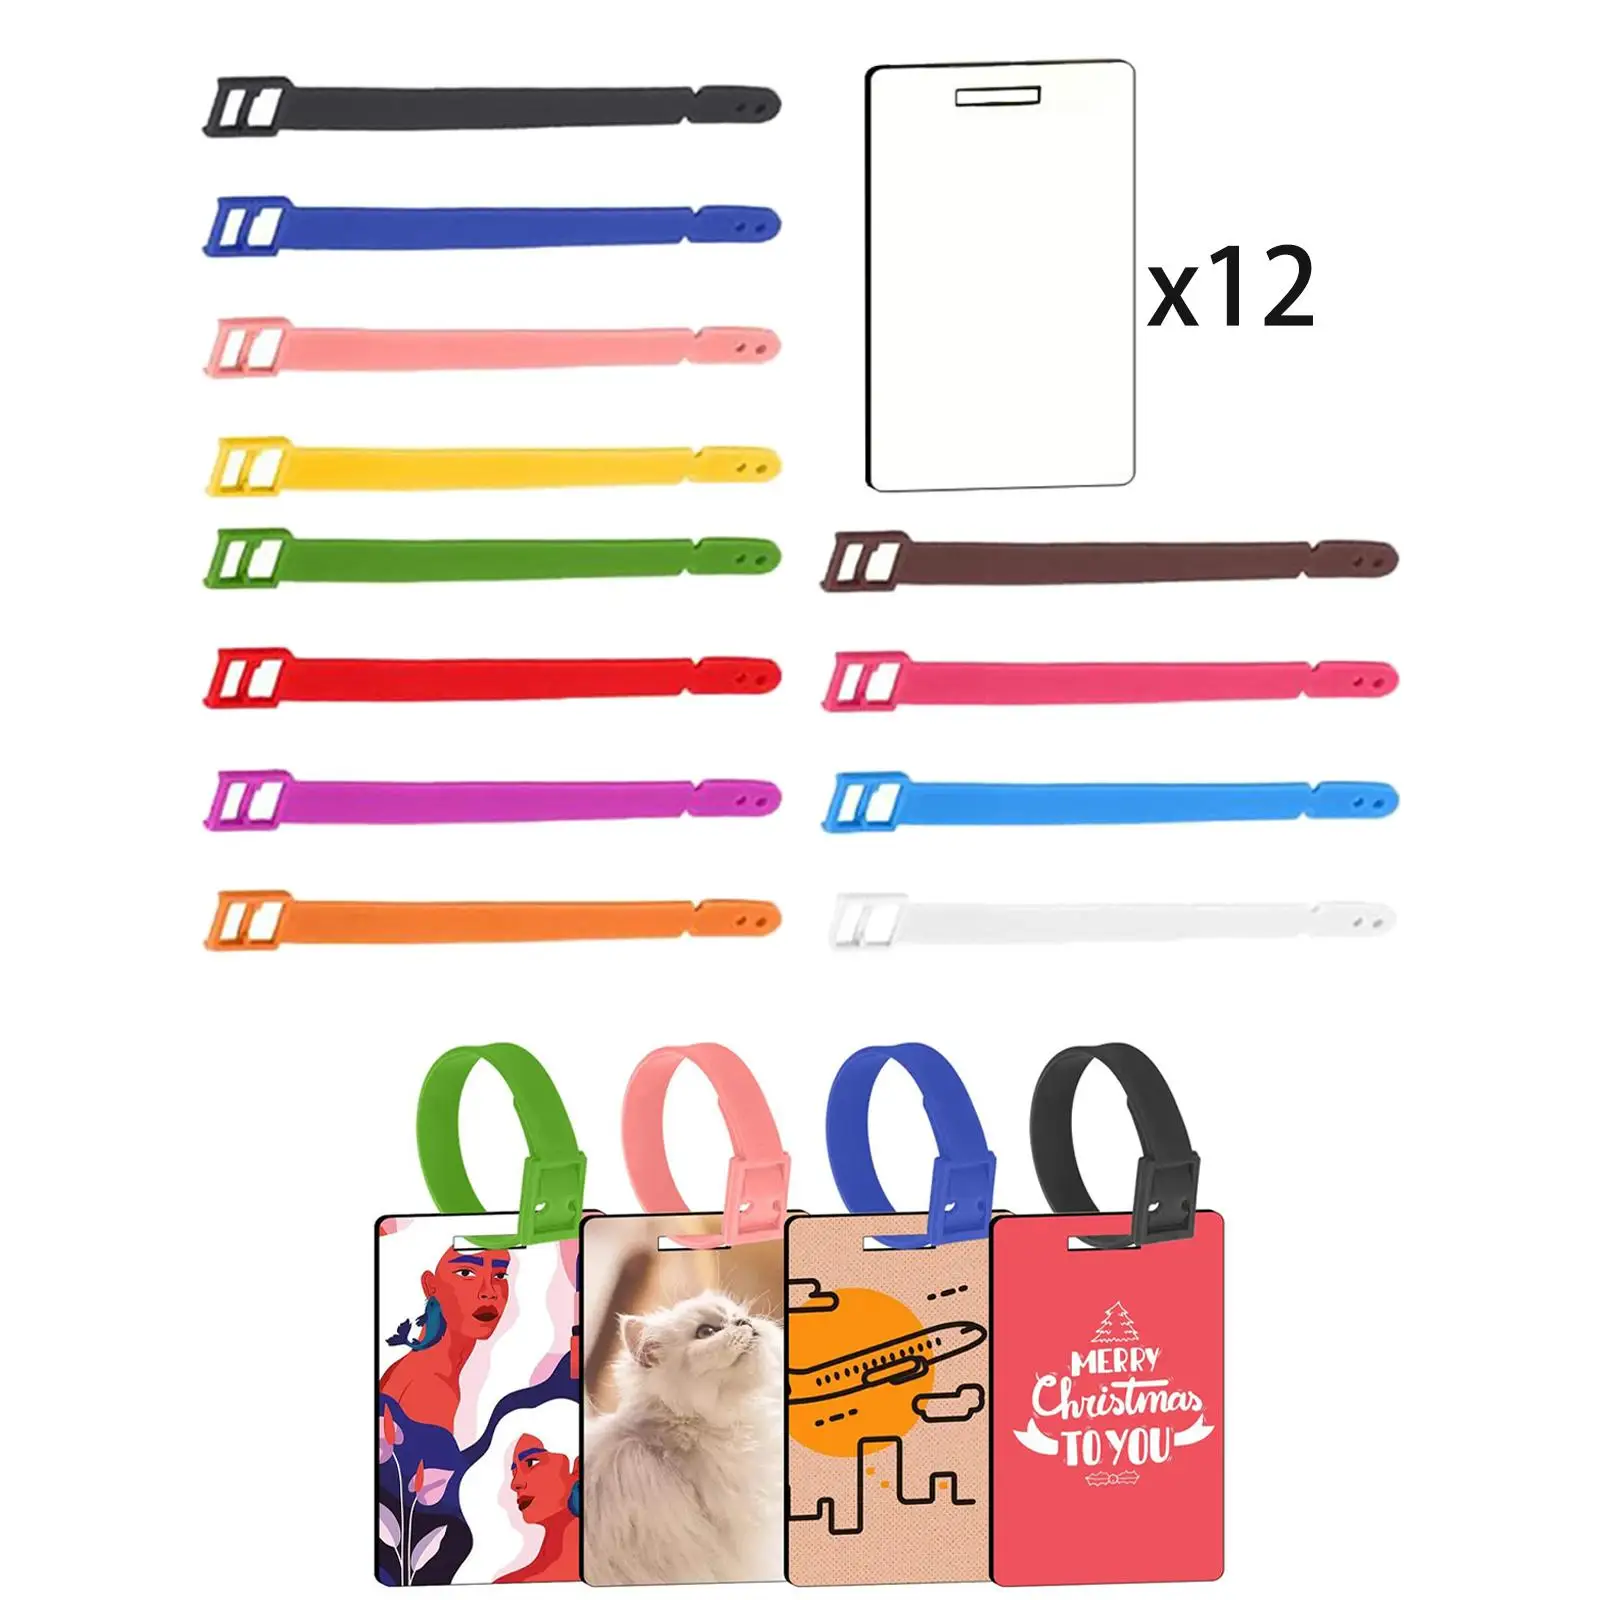 12x Sublimation Blank Luggage Tags DIY MDF Label Multifunctional Heat Transfer Tags White for Suitcase Travel Bag Gift Traveling